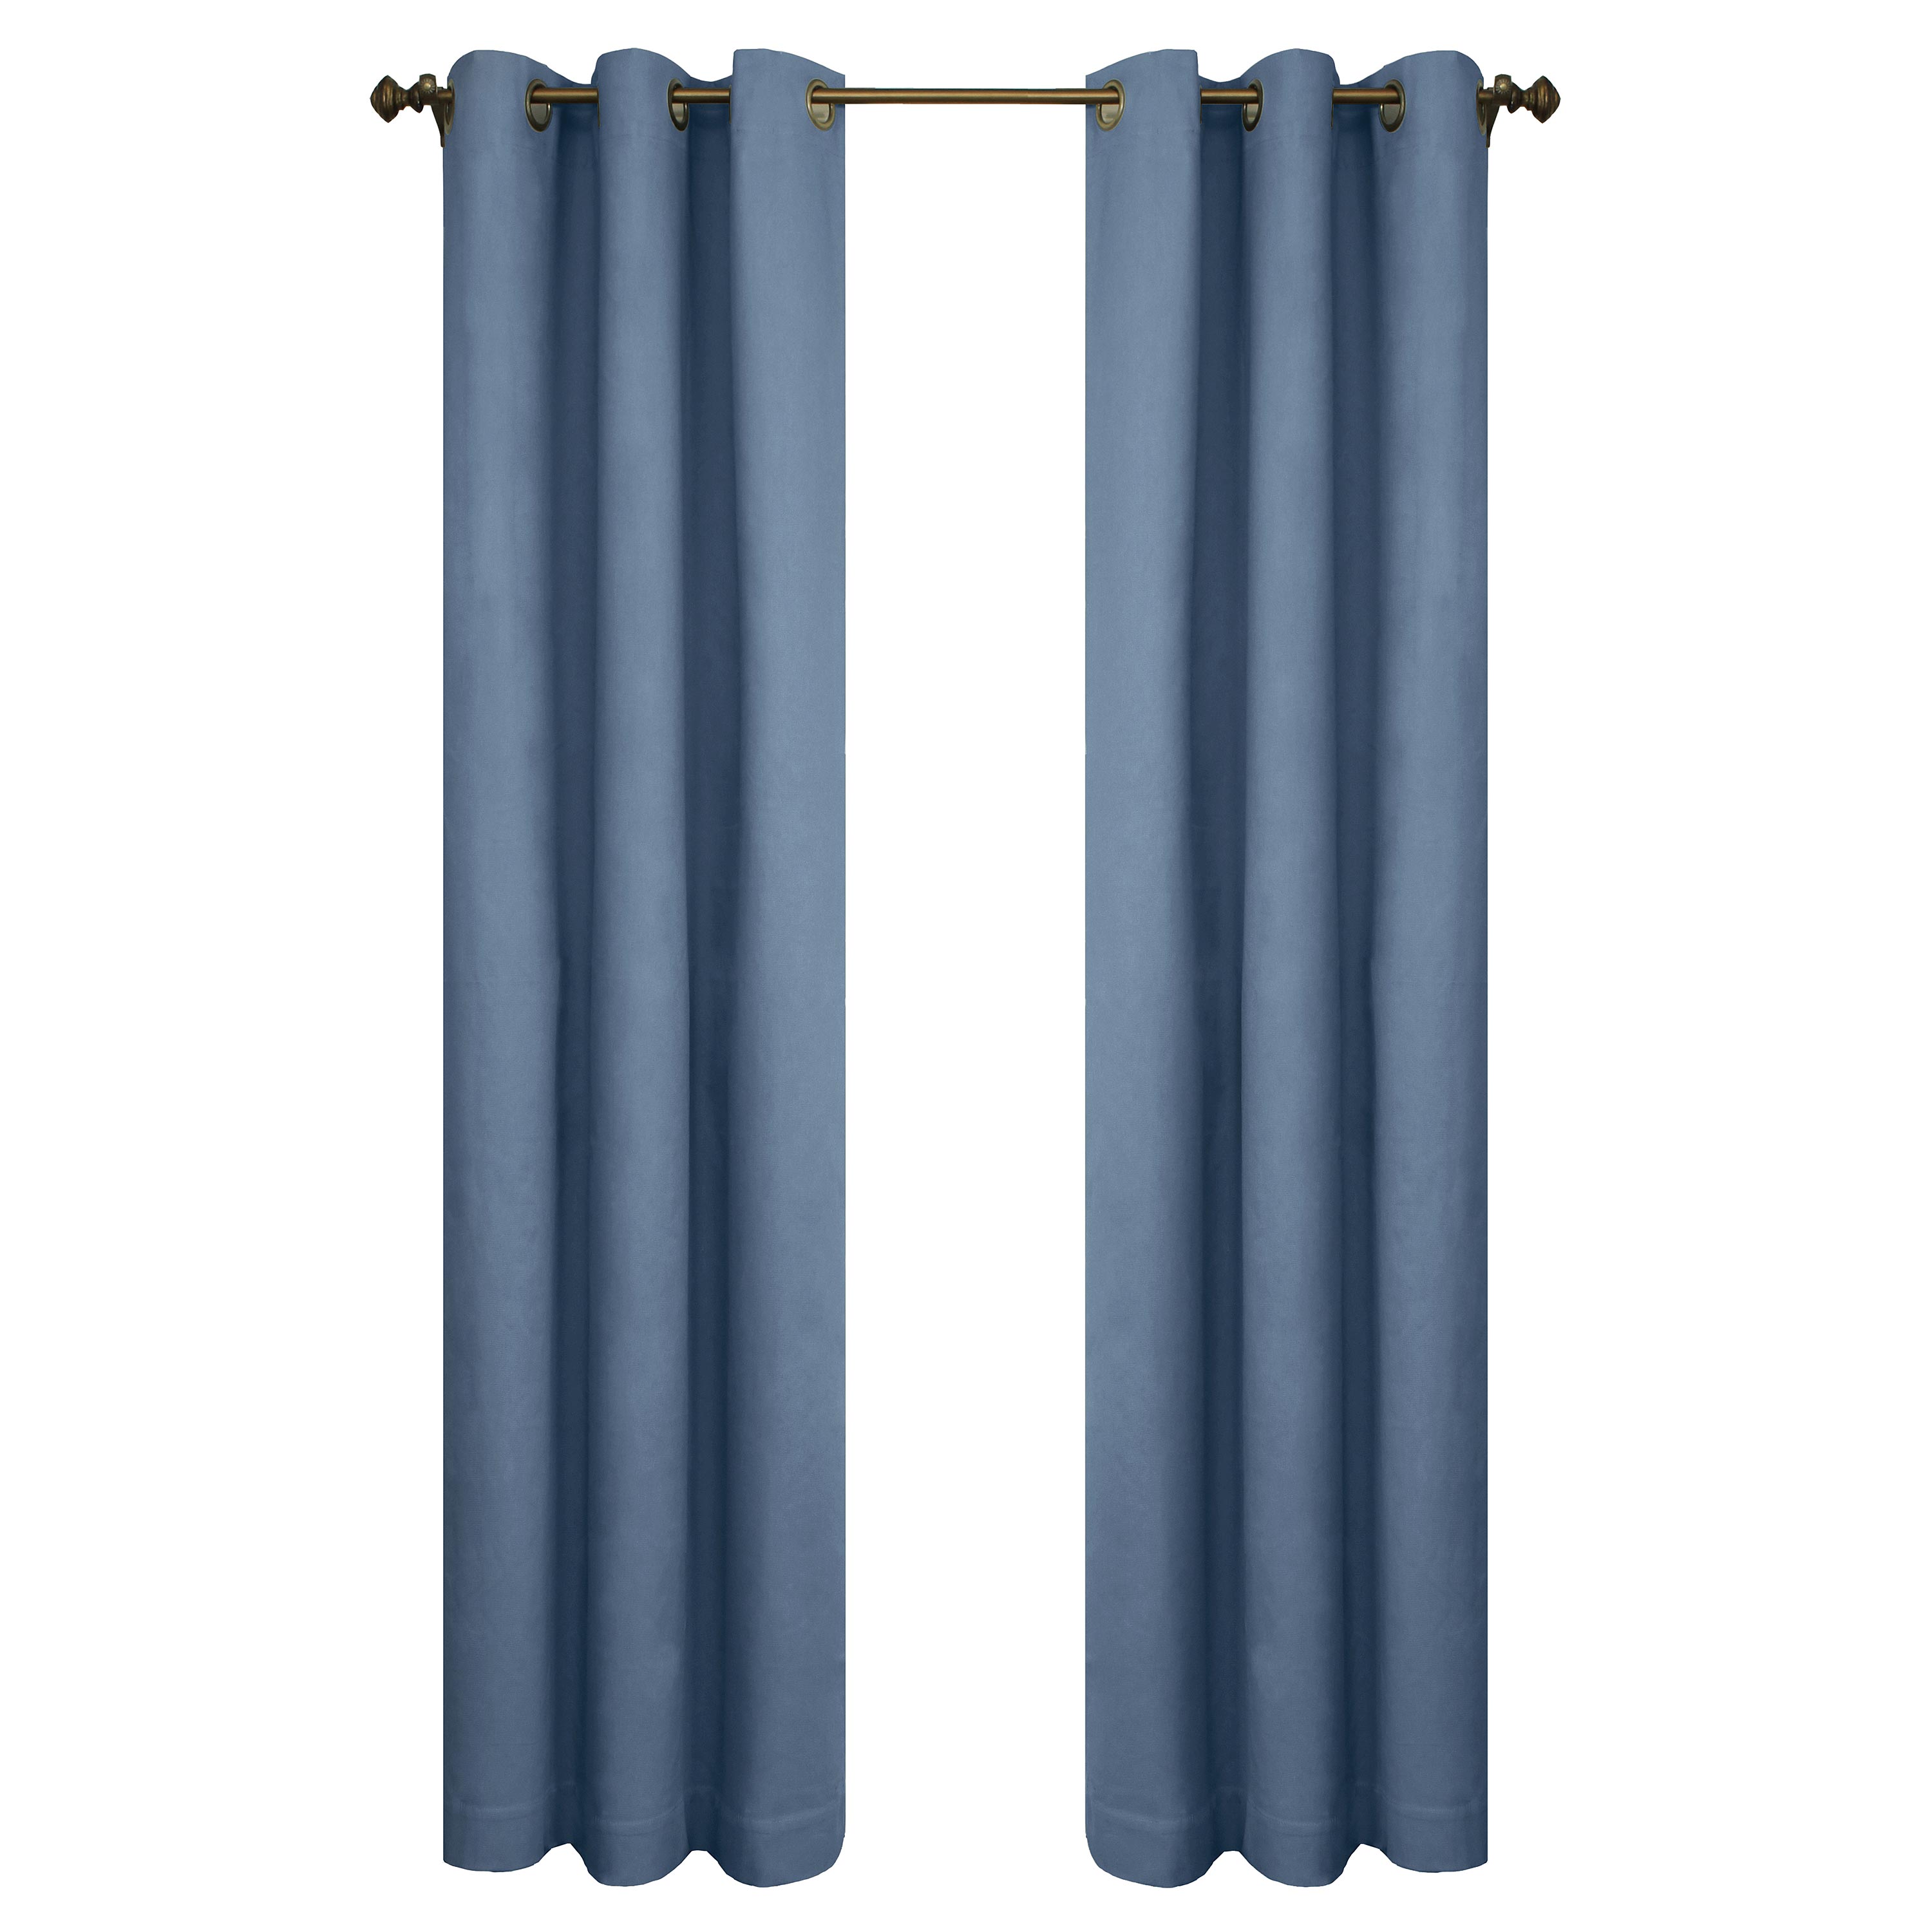 72"L Thermalogic Energy Efficient Insulated Solid Grommet-Top Curtain Pair - Blue